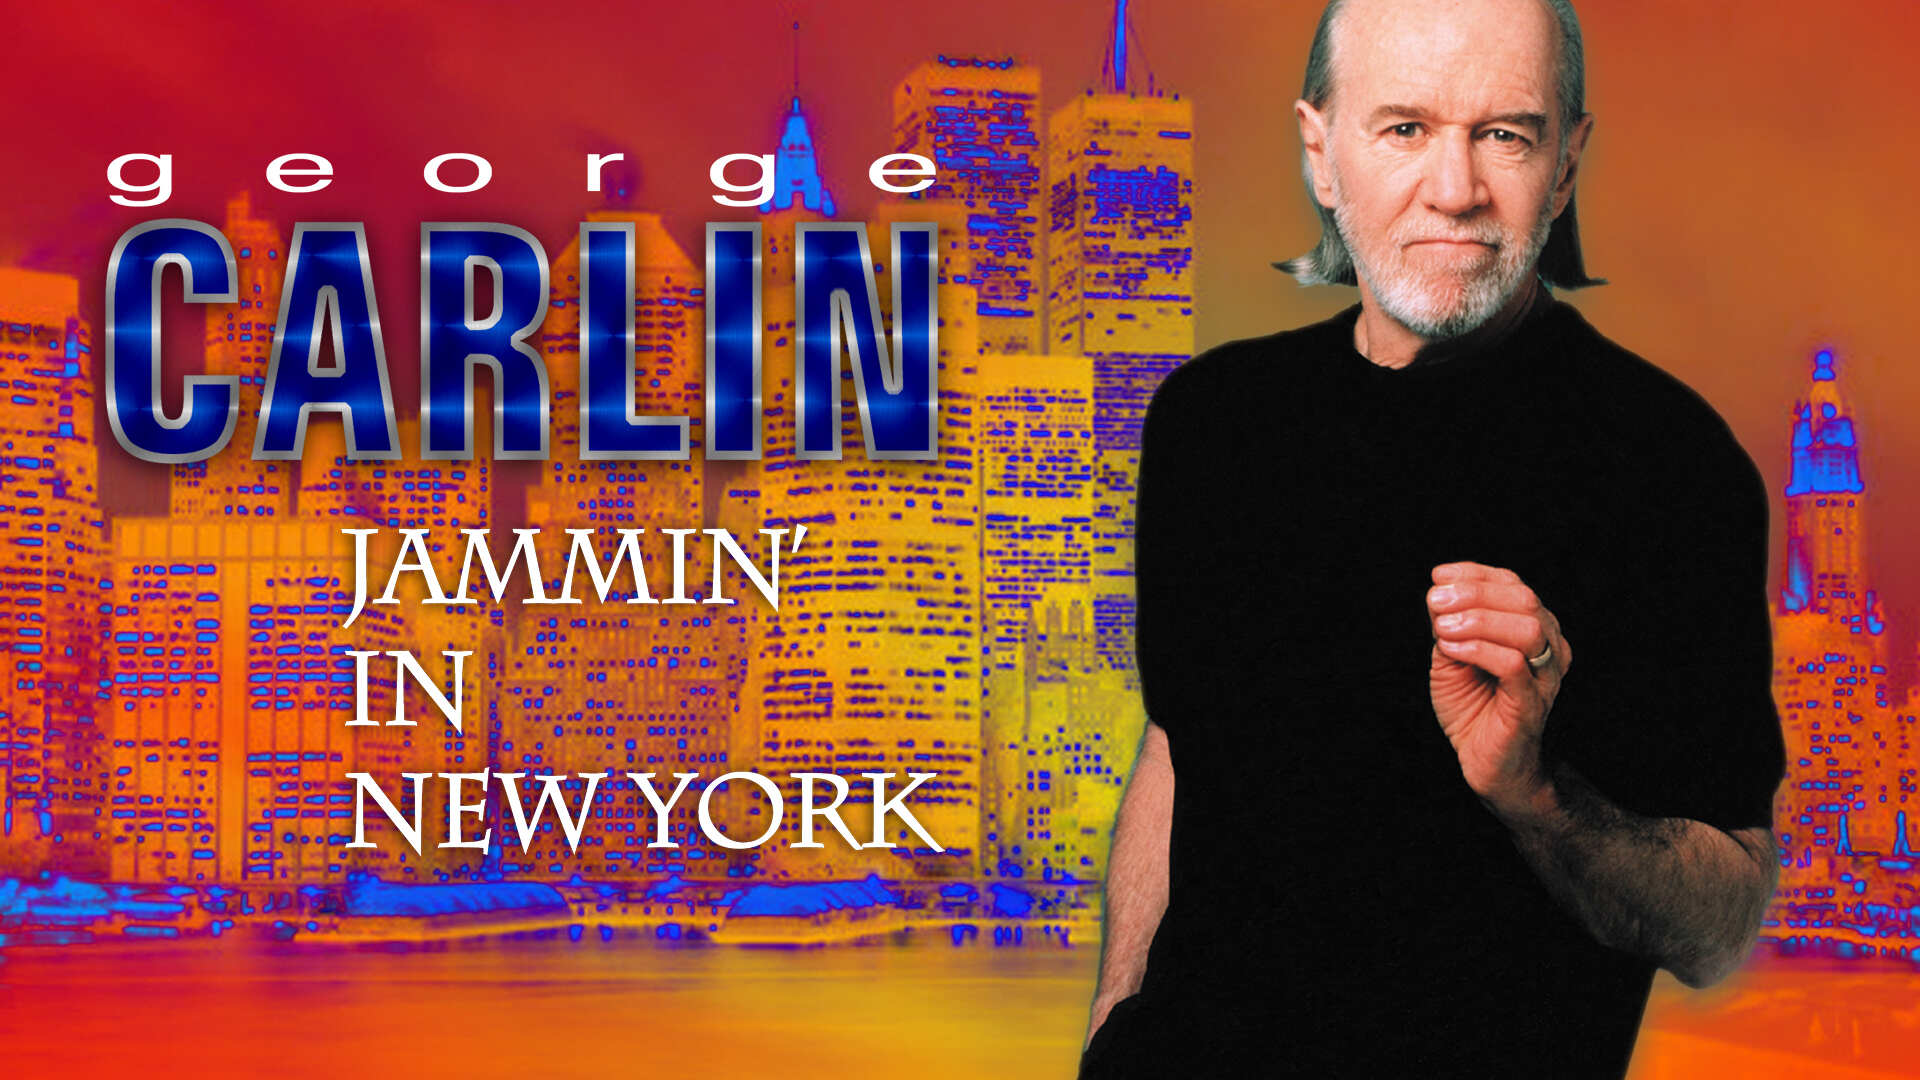 37-facts-about-the-movie-george-carlin-jammin-in-new-york